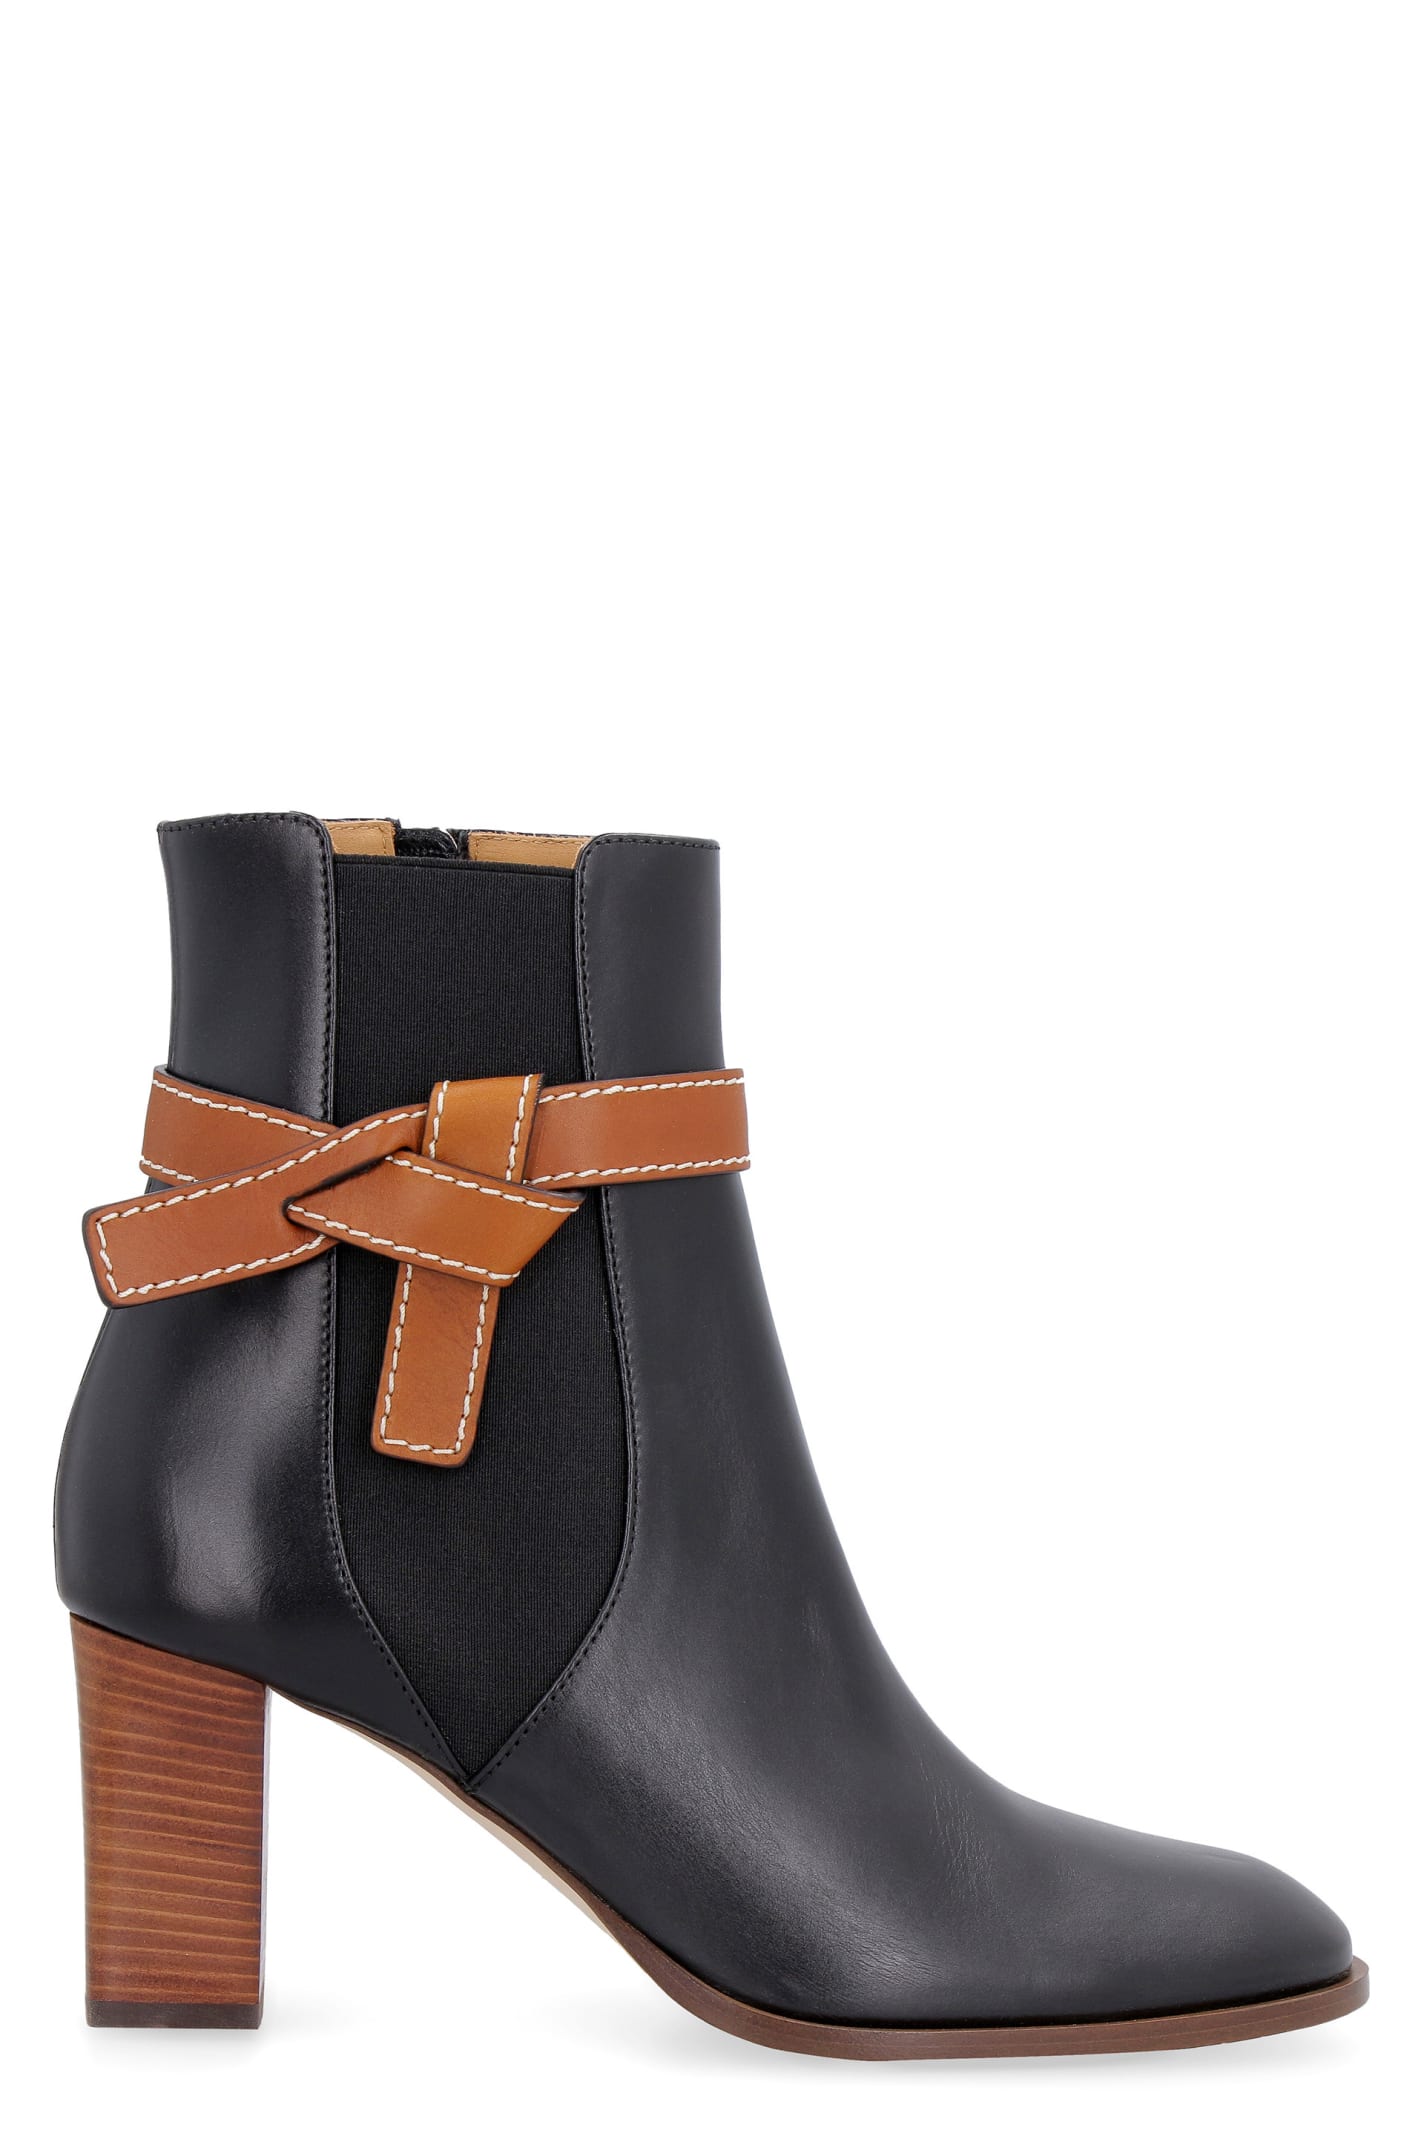 Loewe Gate Leather Ankle Boots